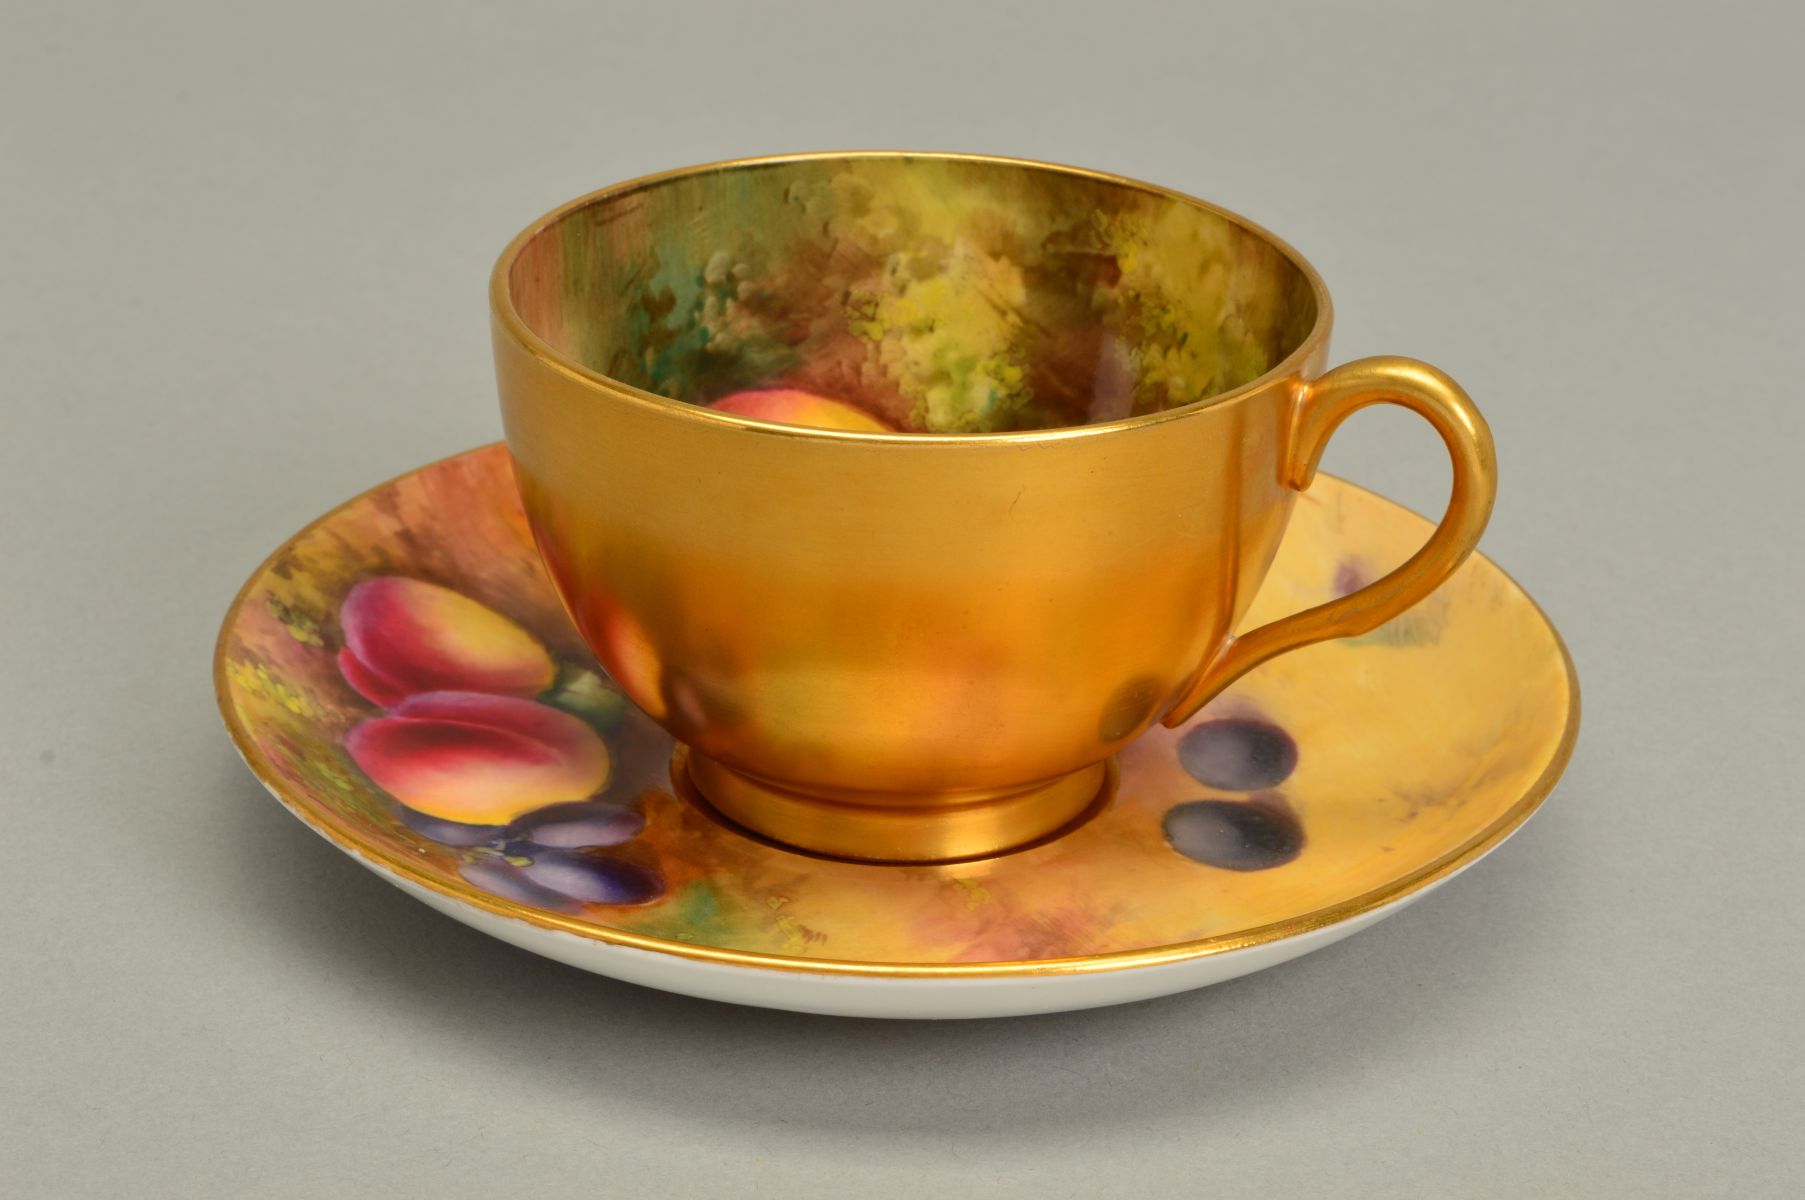 A ROYAL WORCESTER FRUIT STUDY TEACUP AND SAUCER, the exterior of the cup gilded, the interior